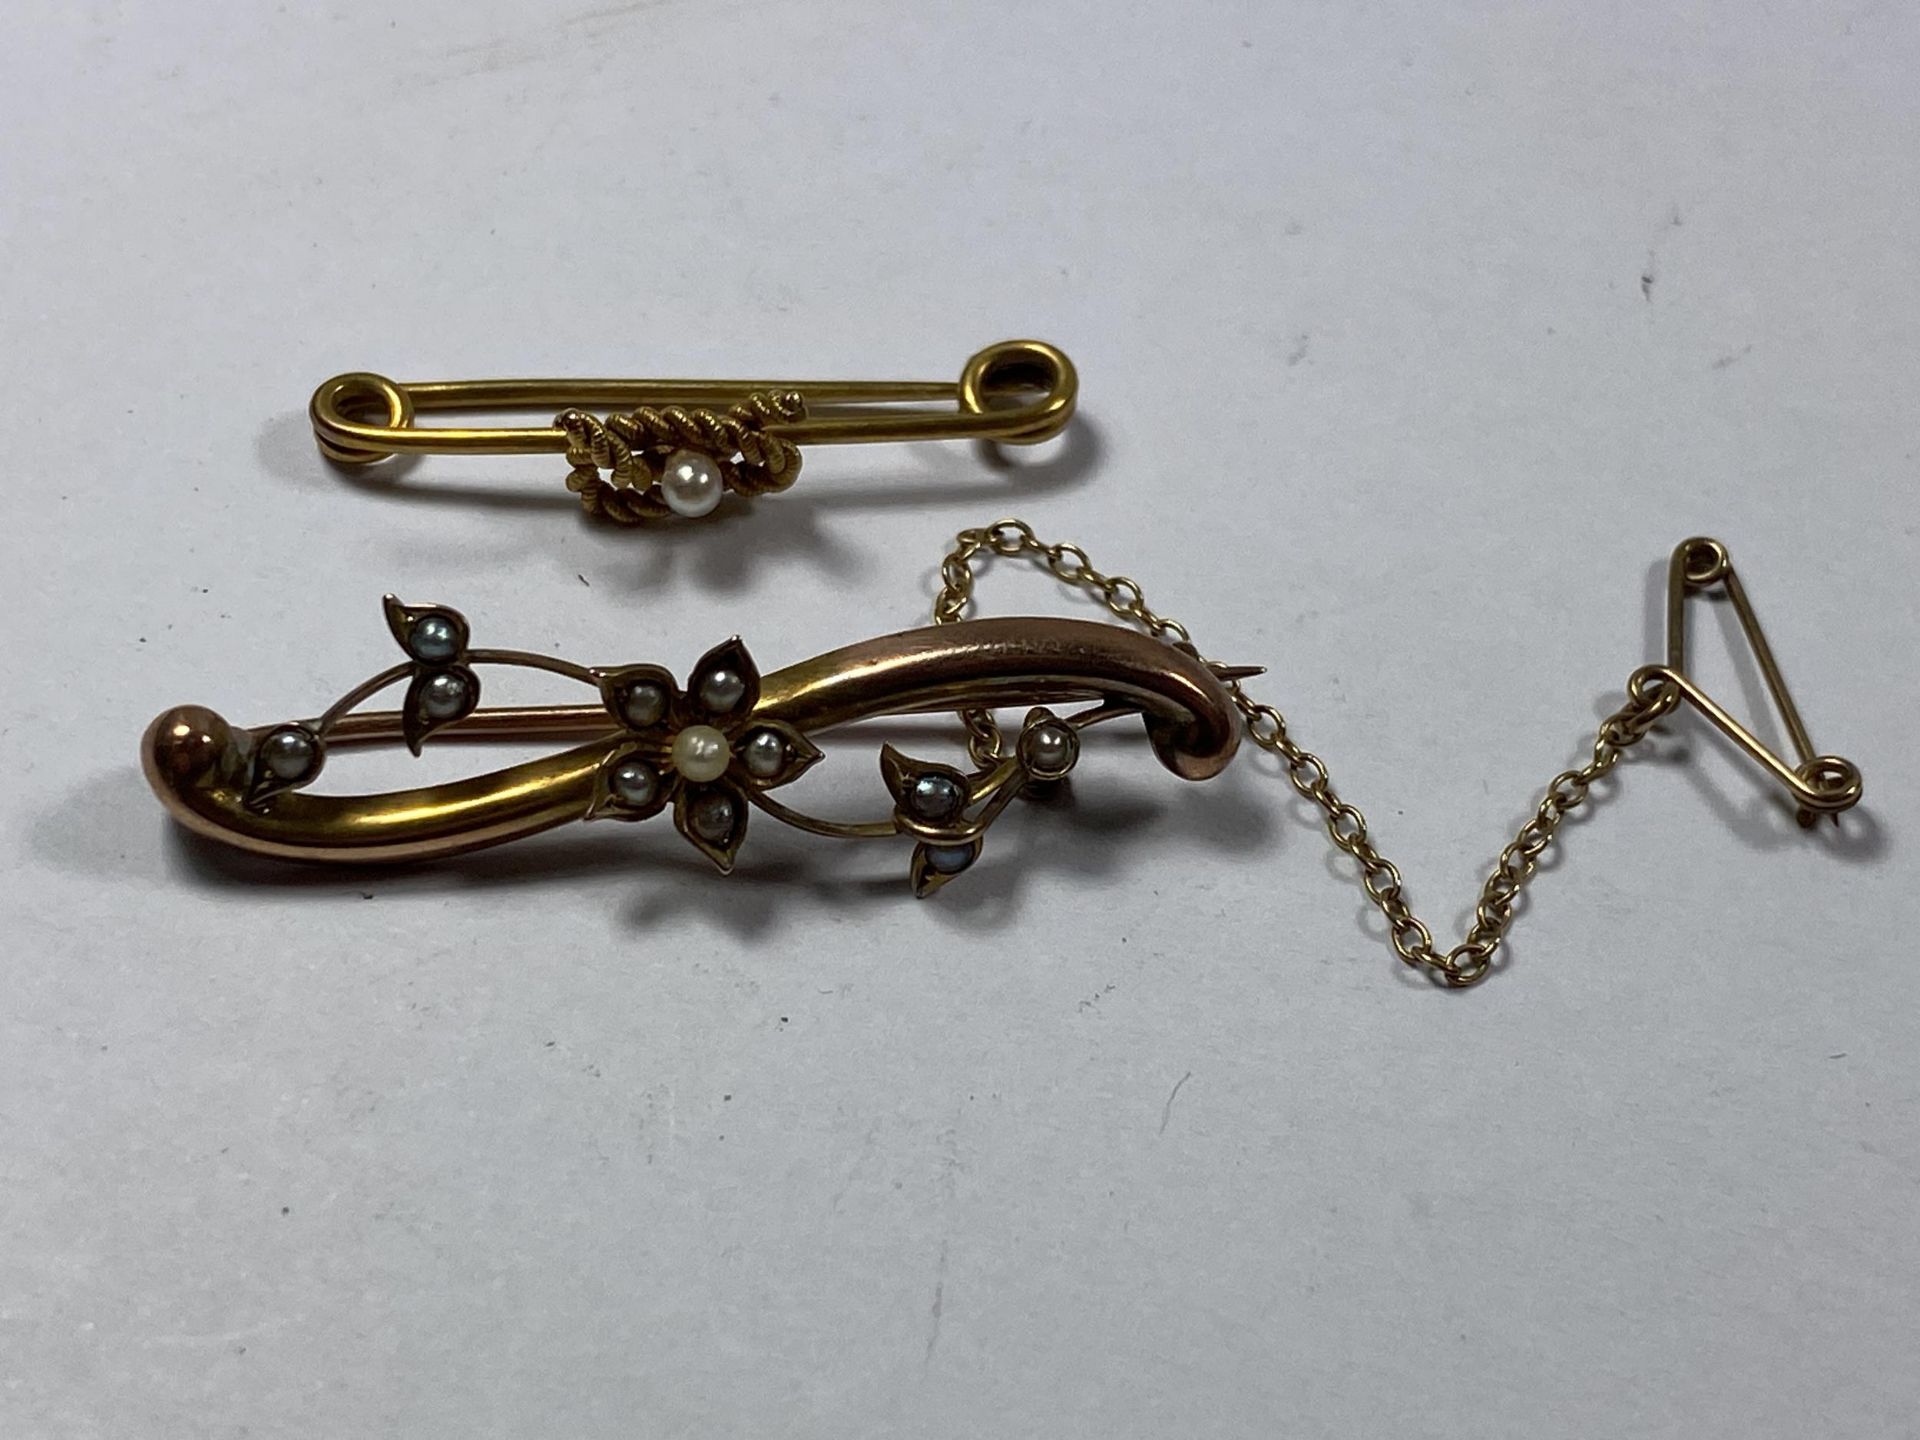 A 9CT YELLOW GOLD FLORAL BROOCH & FURTHER UNMARKED KNOT DESIGN BROOCH, GOLD BROOCH WEIGHT 2.5G